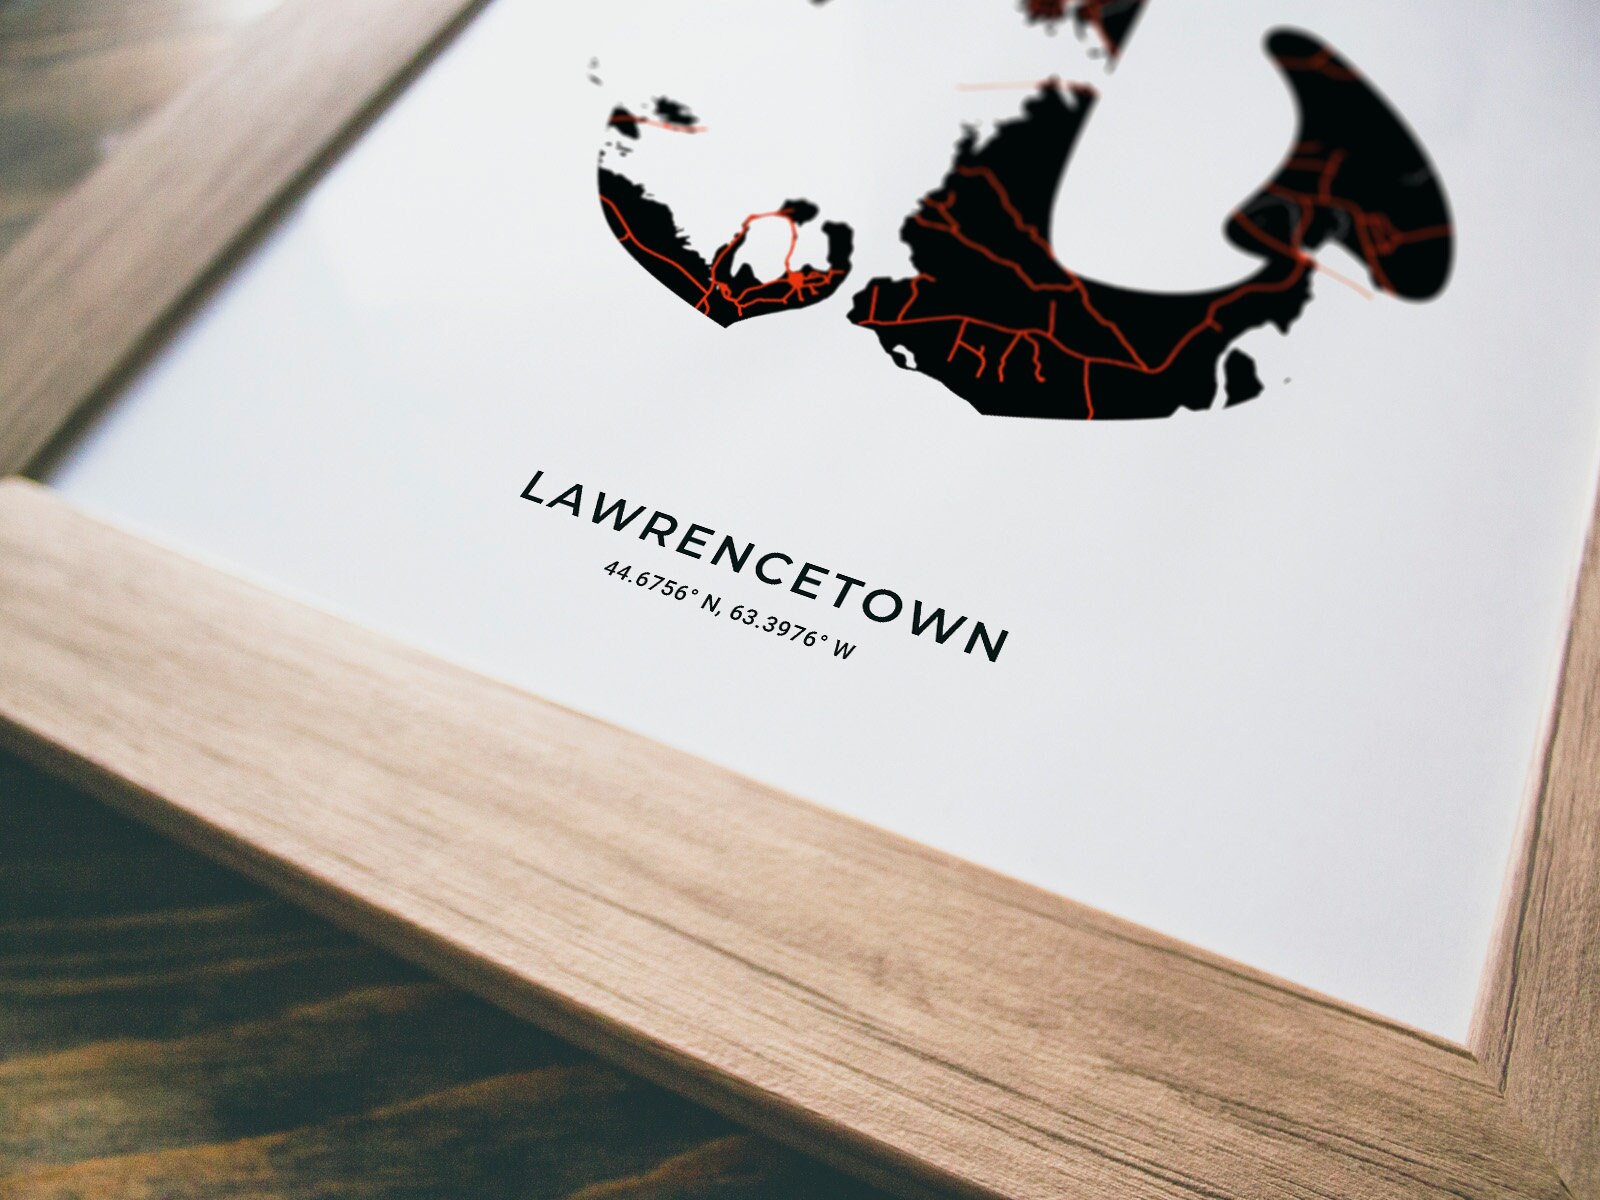 Lawrencetown Anchor Print Map of Lawrencetown Nova Scotia